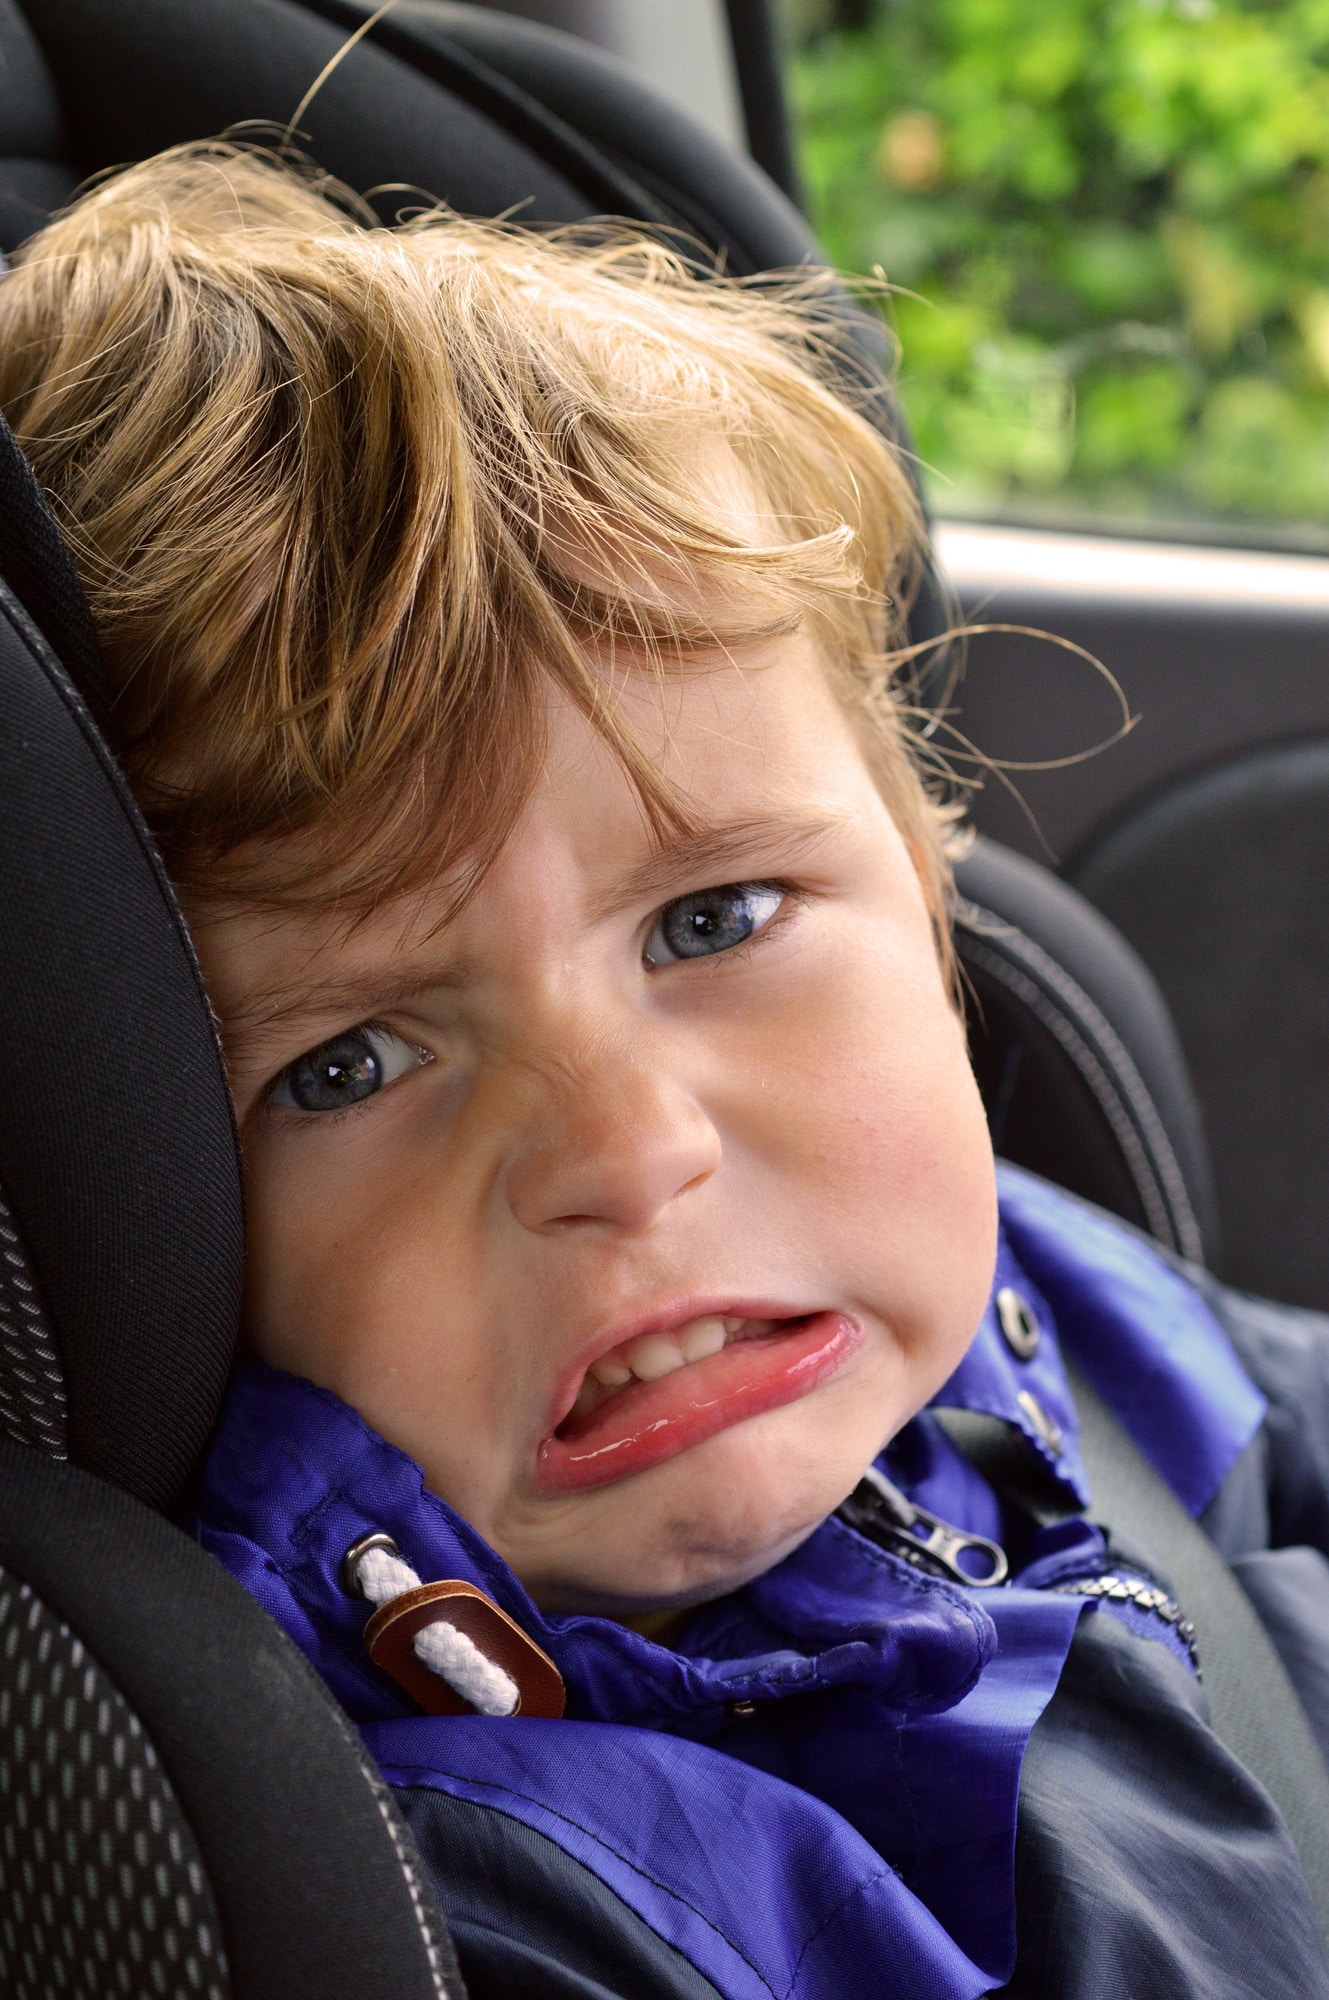 frowning in child carseat